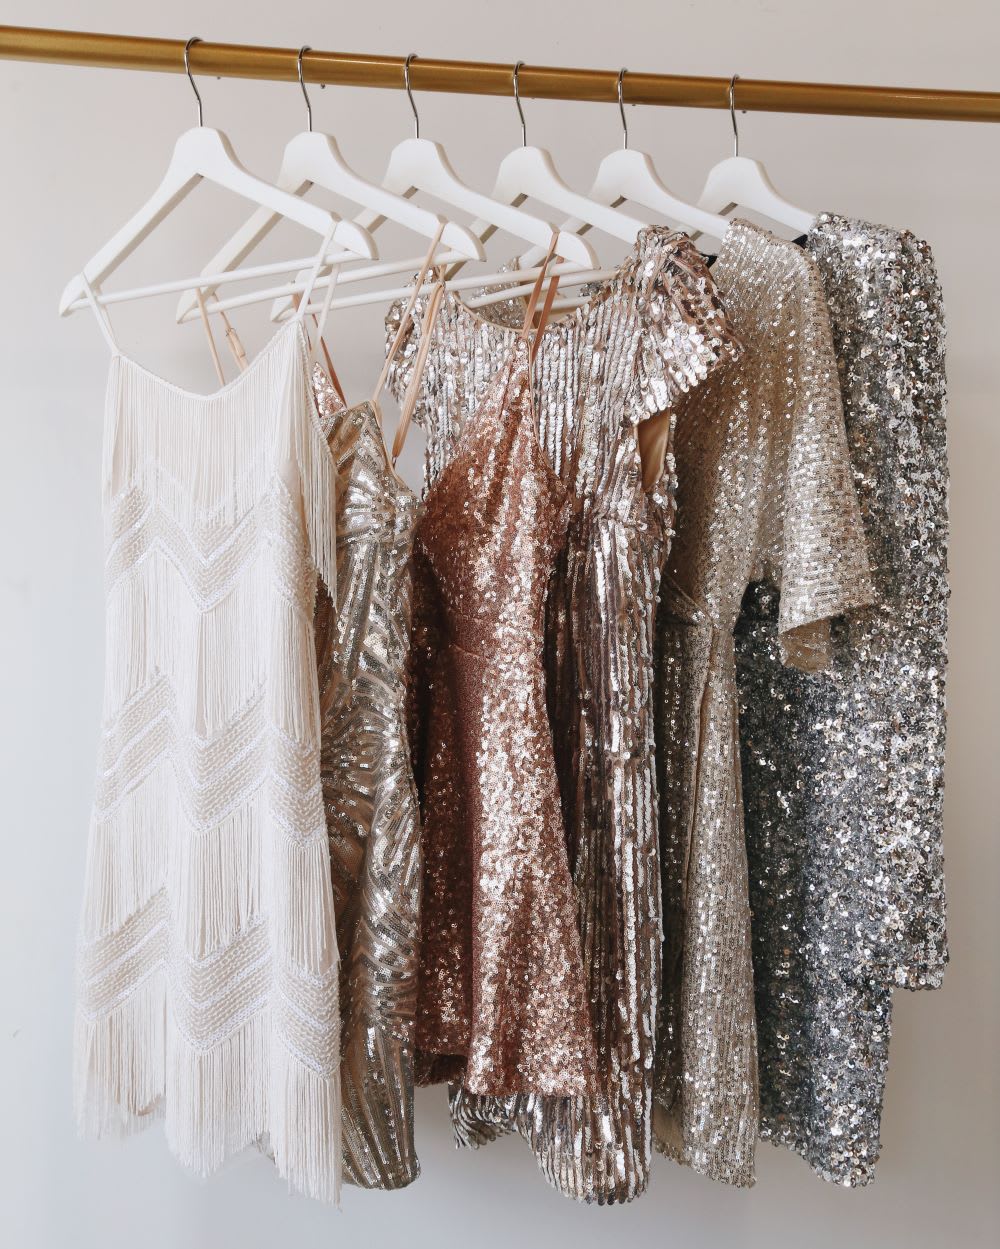 sparkly dresses for new year's eve outfits